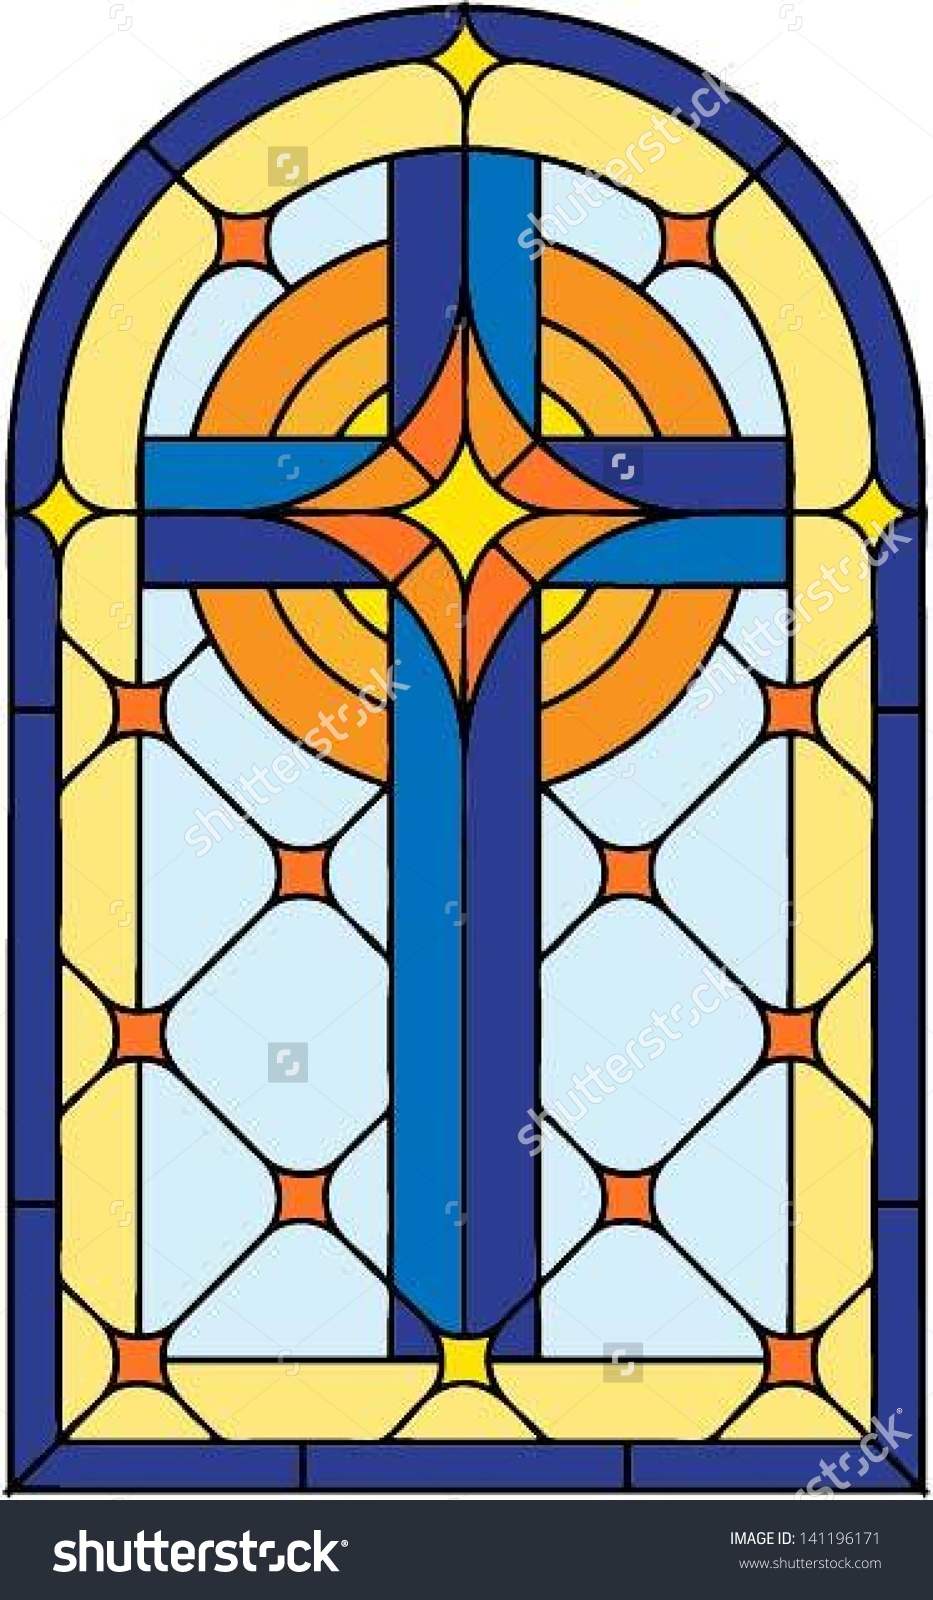 stained glass clipart free - photo #44